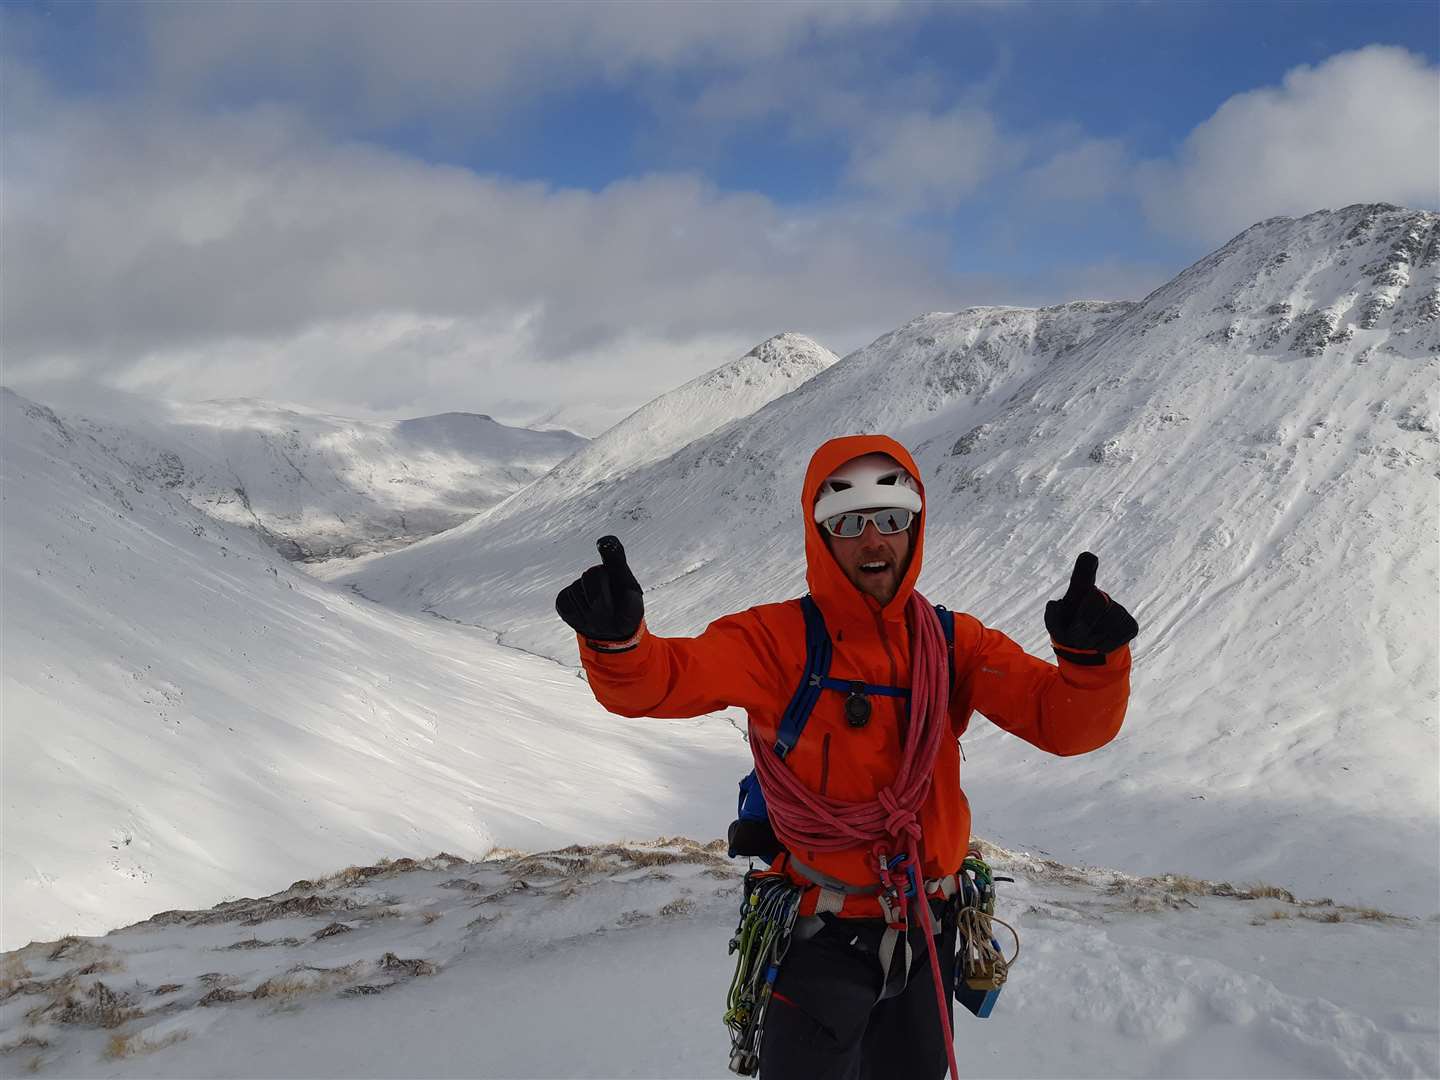 Ben Gibson wants people to #ThinkWINTER before heading to the hills.